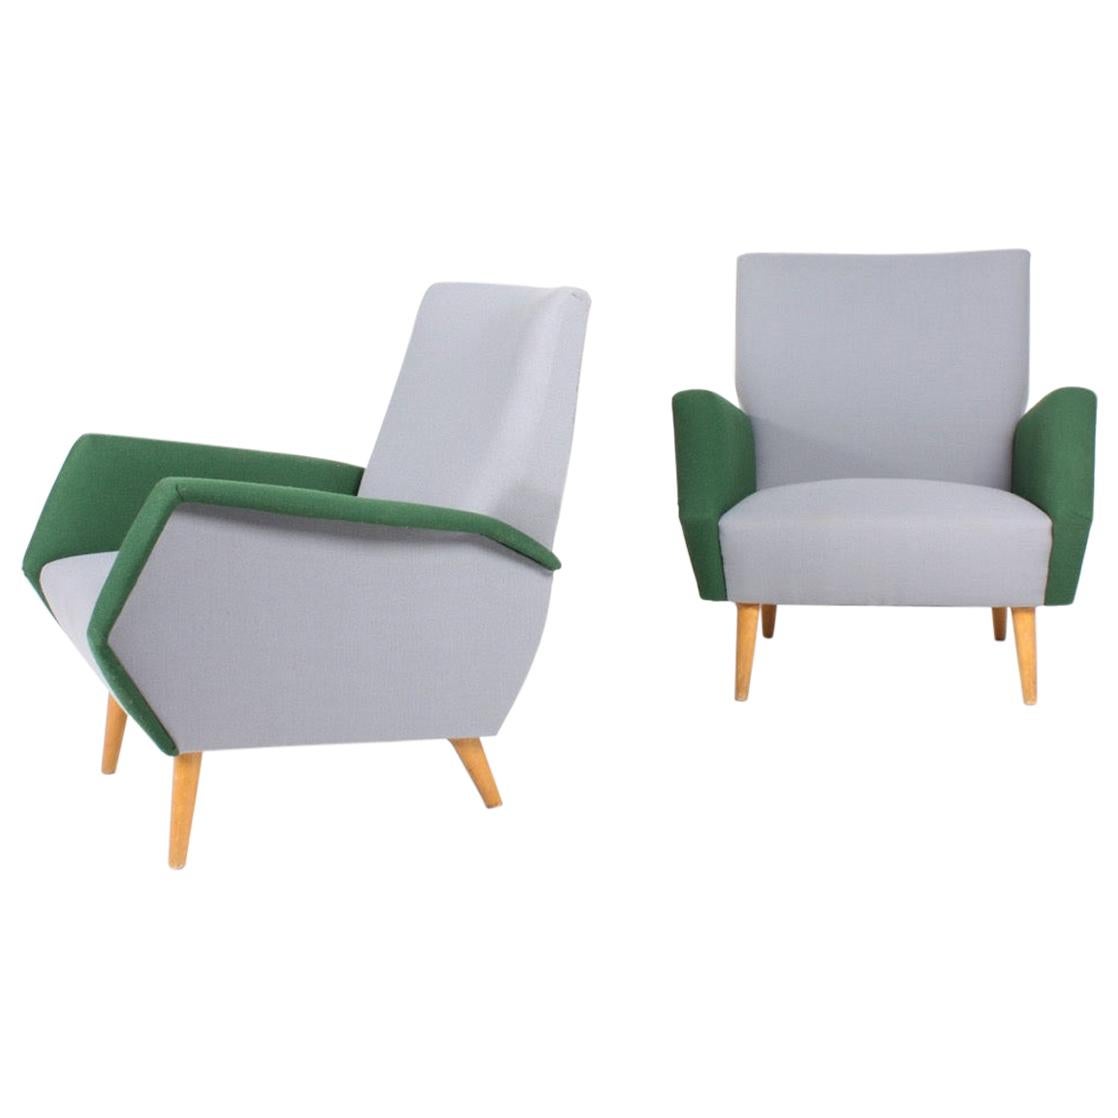 Pair of Midcentury Lounge Chairs by Gio Ponti